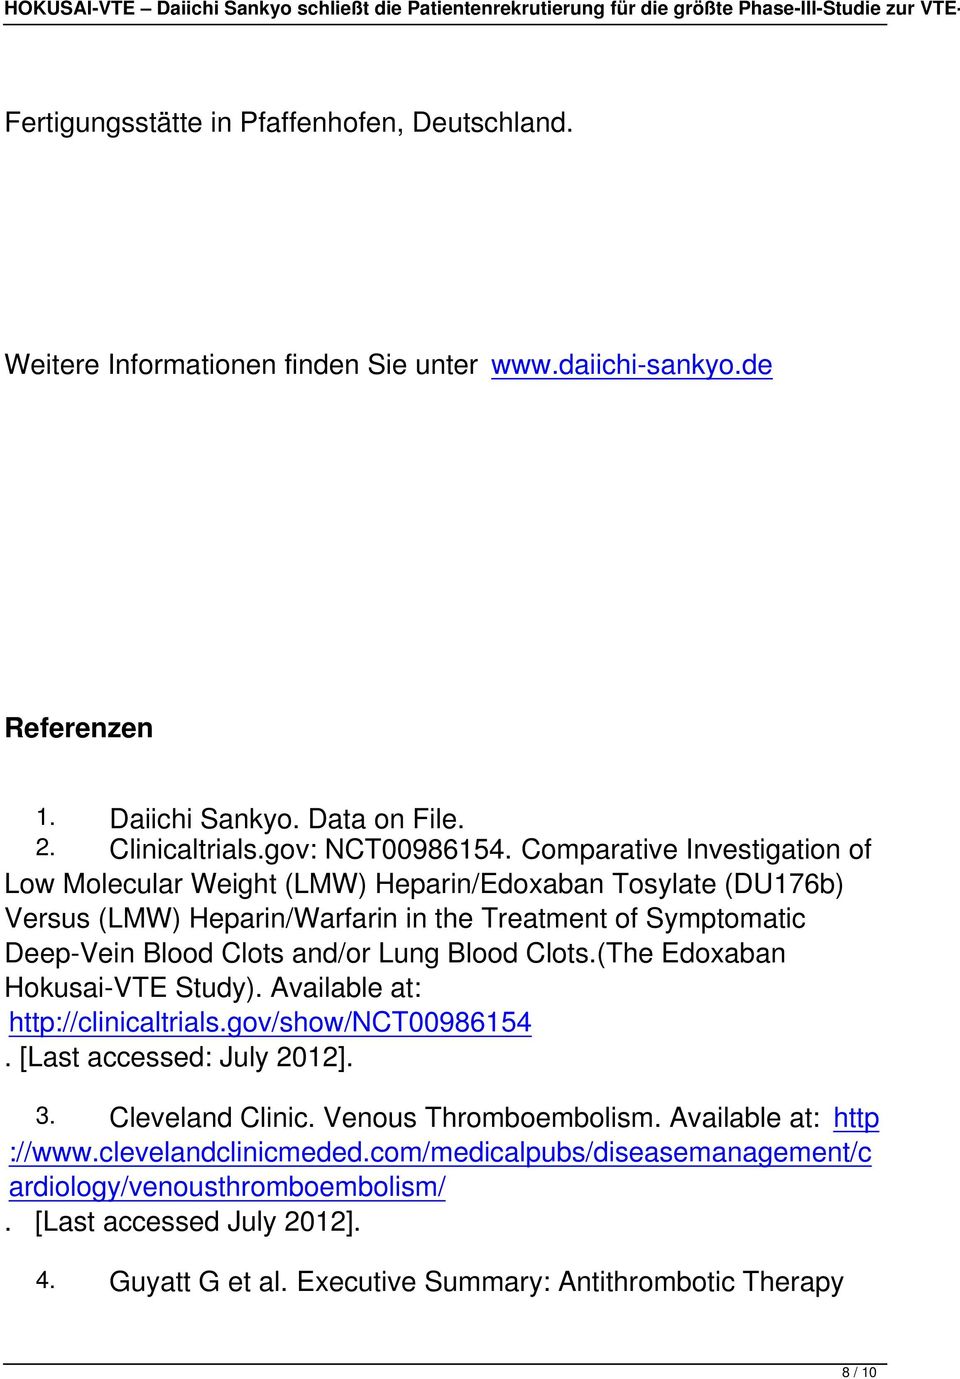 Blood Clots.(The Edoxaban Hokusai-VTE Study). Available at: http://clinicaltrials.gov/show/nct00986154. [Last accessed: July 2012]. 3. Cleveland Clinic. Venous Thromboembolism.